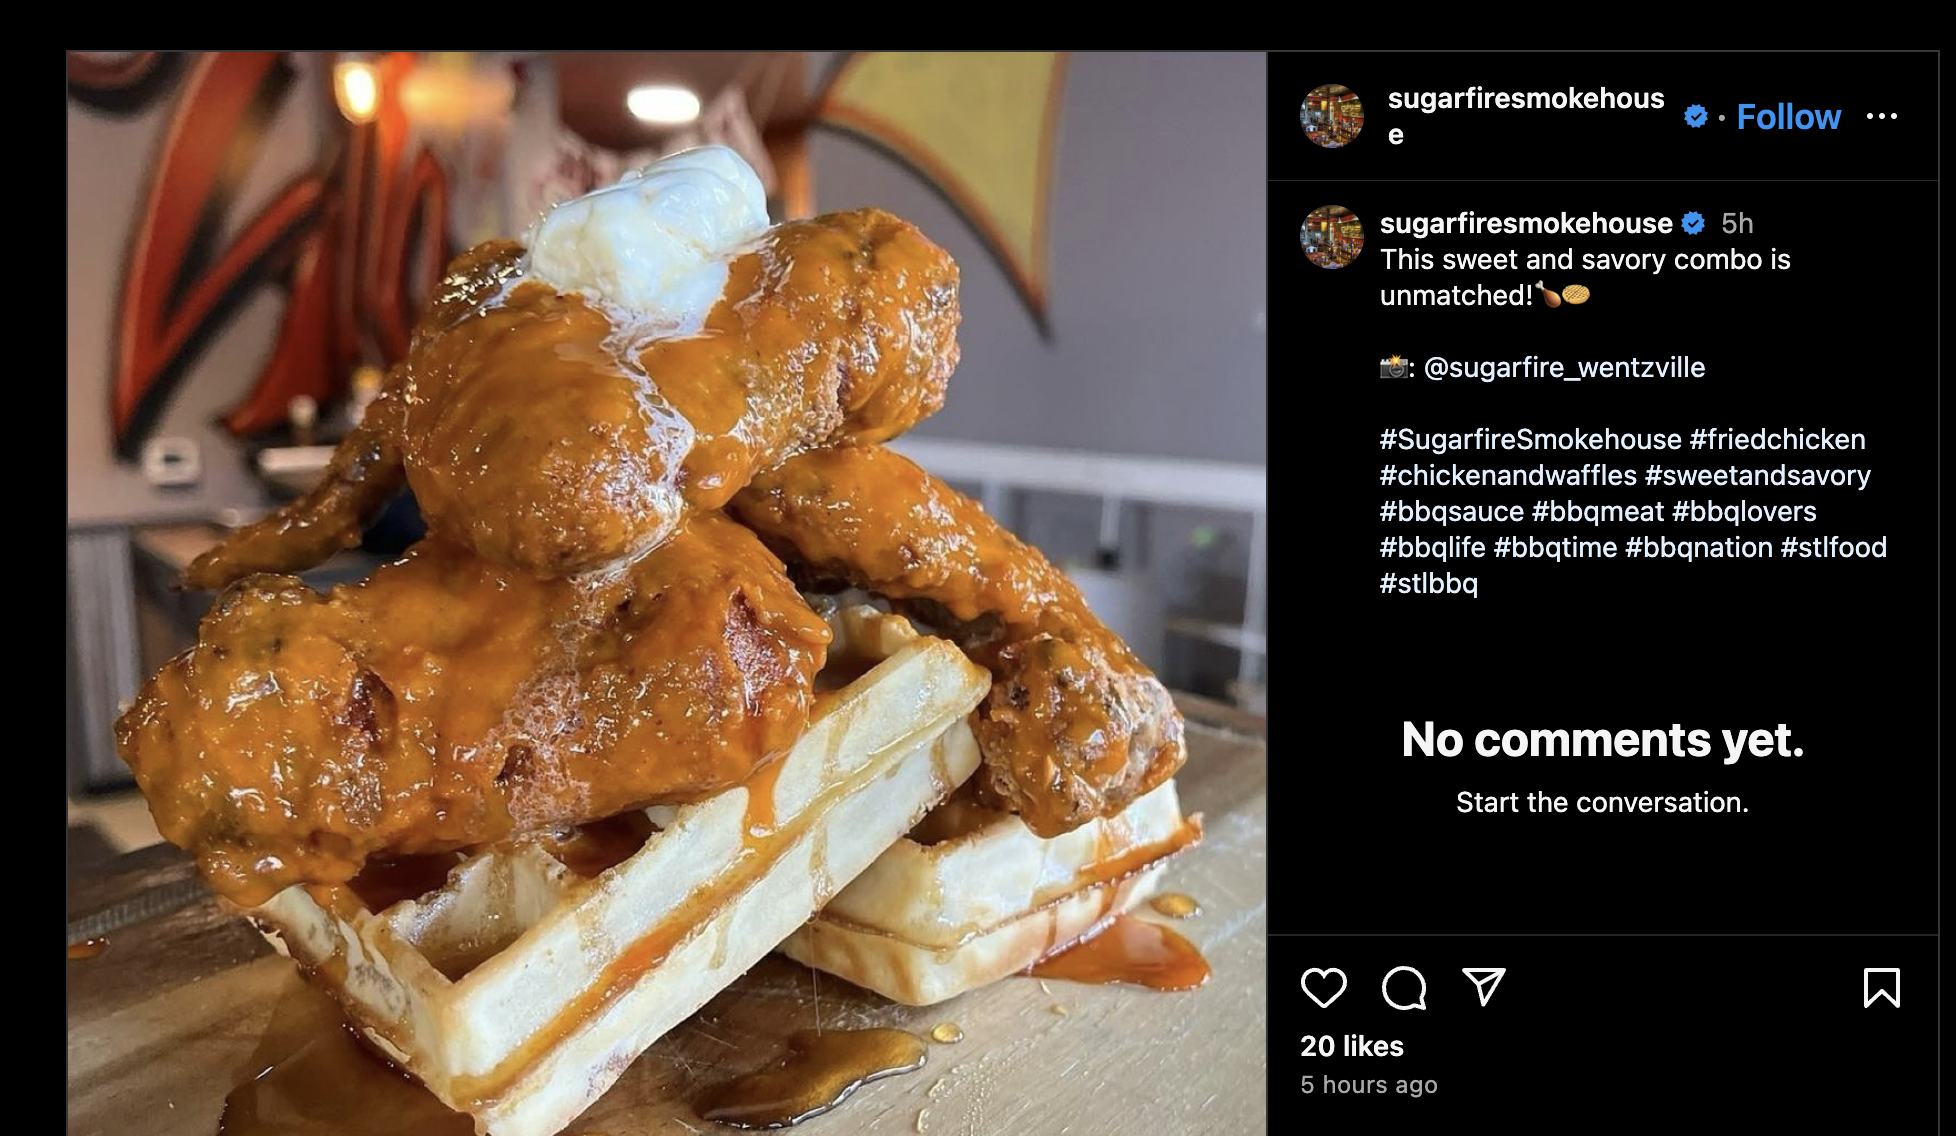 Image of friend chicken and waffles from Sugarfire Smokehouse restaurant in Saint Louis MO